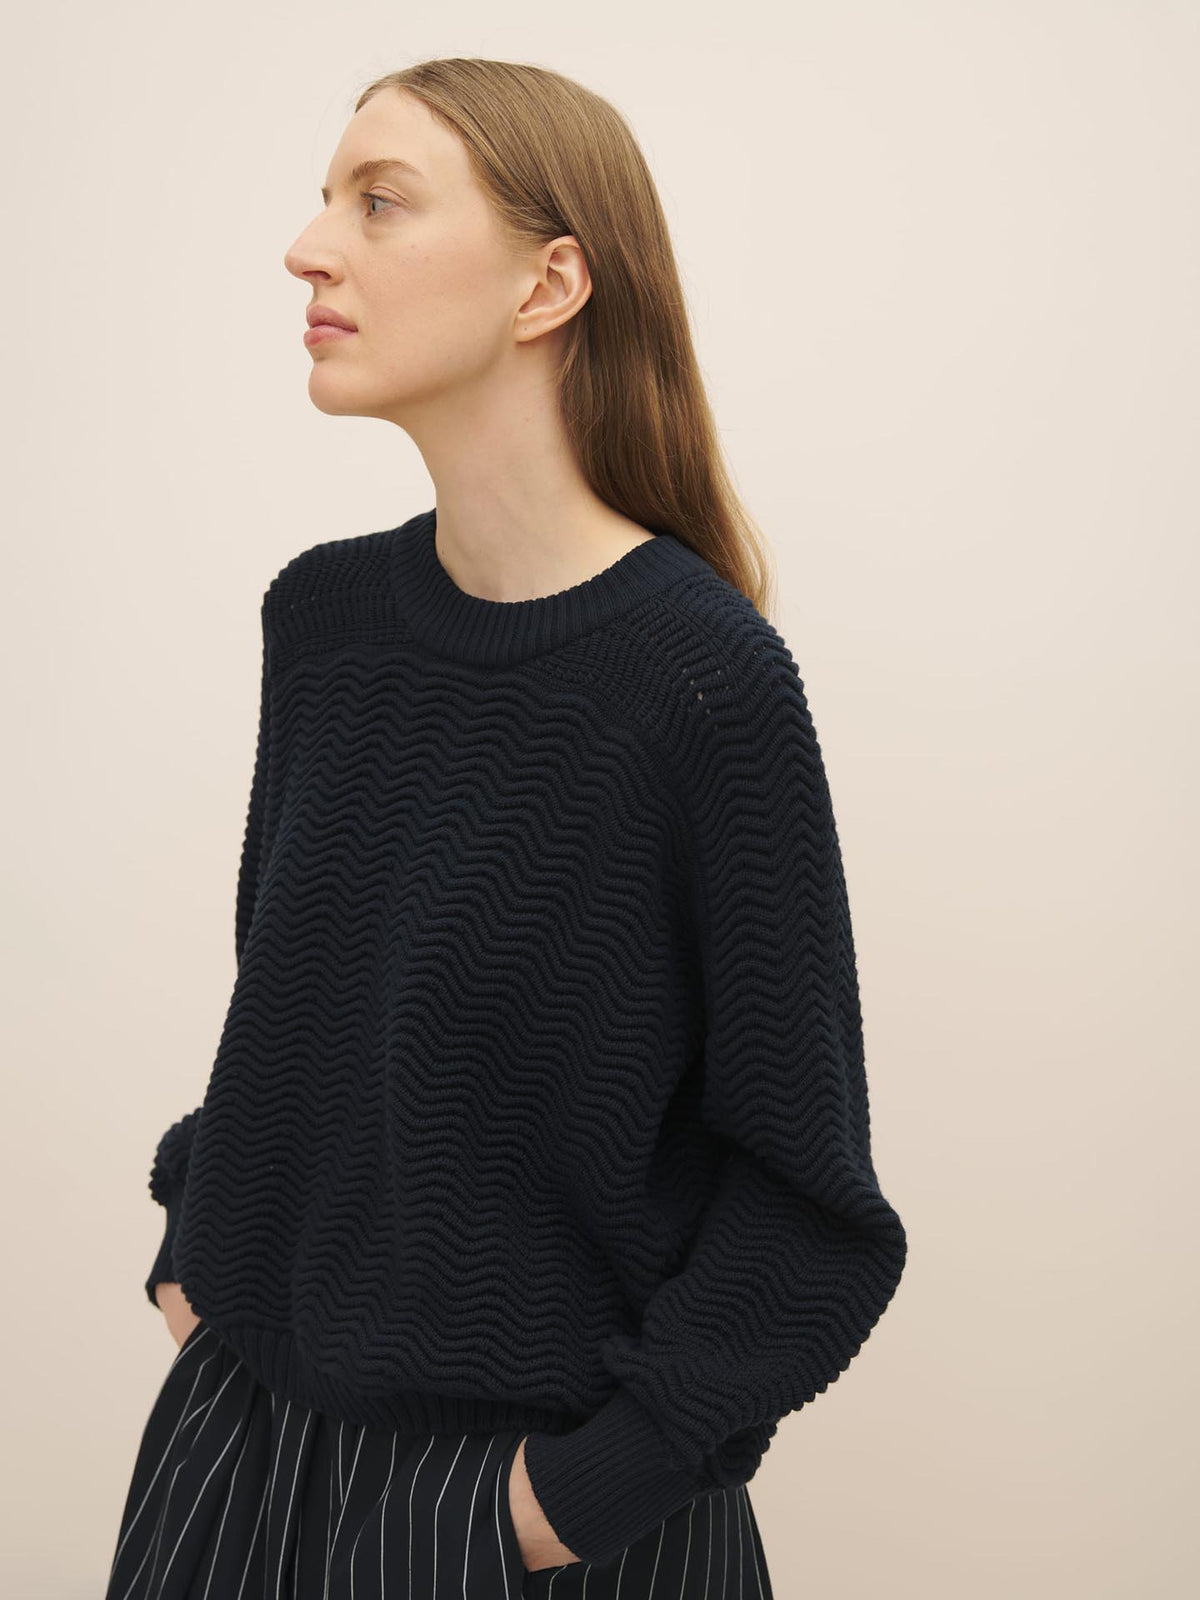 Side profile of a woman with long blonde hair, wearing a Kowtow Zig Zag Crew – Indigo rib knit sweater and striped skirt, against a light beige background.